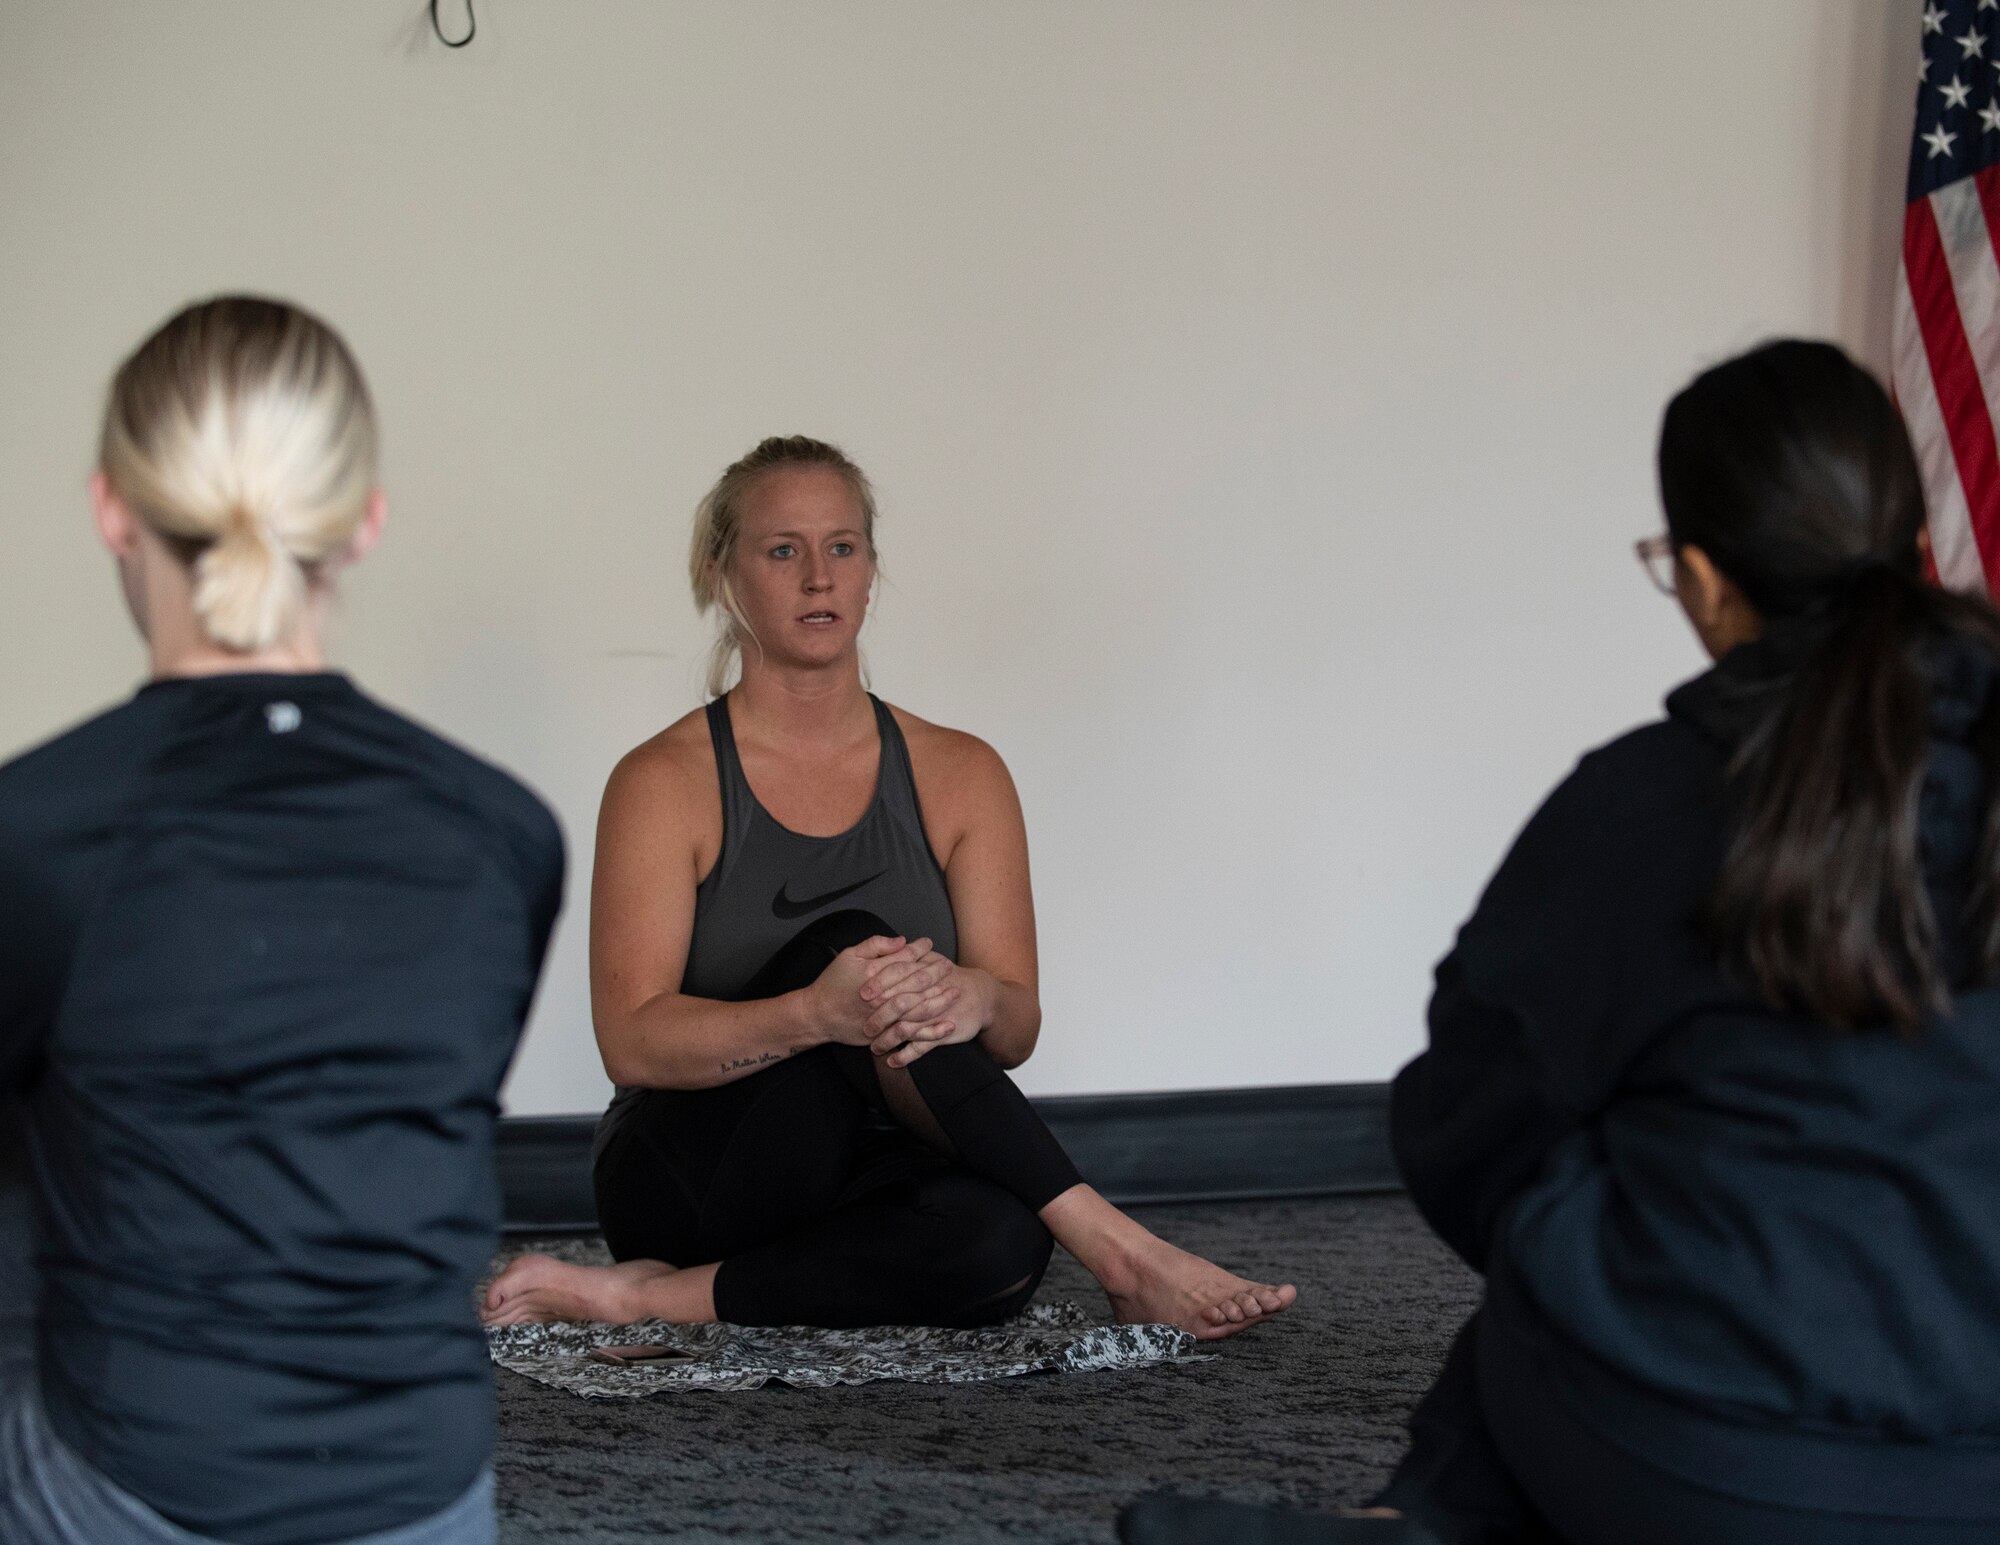 U.S. Air Force Master Sgt. (ret.) Ashley Wilkins teaches a yoga class in St. Paul., Oct. 16, 2022.